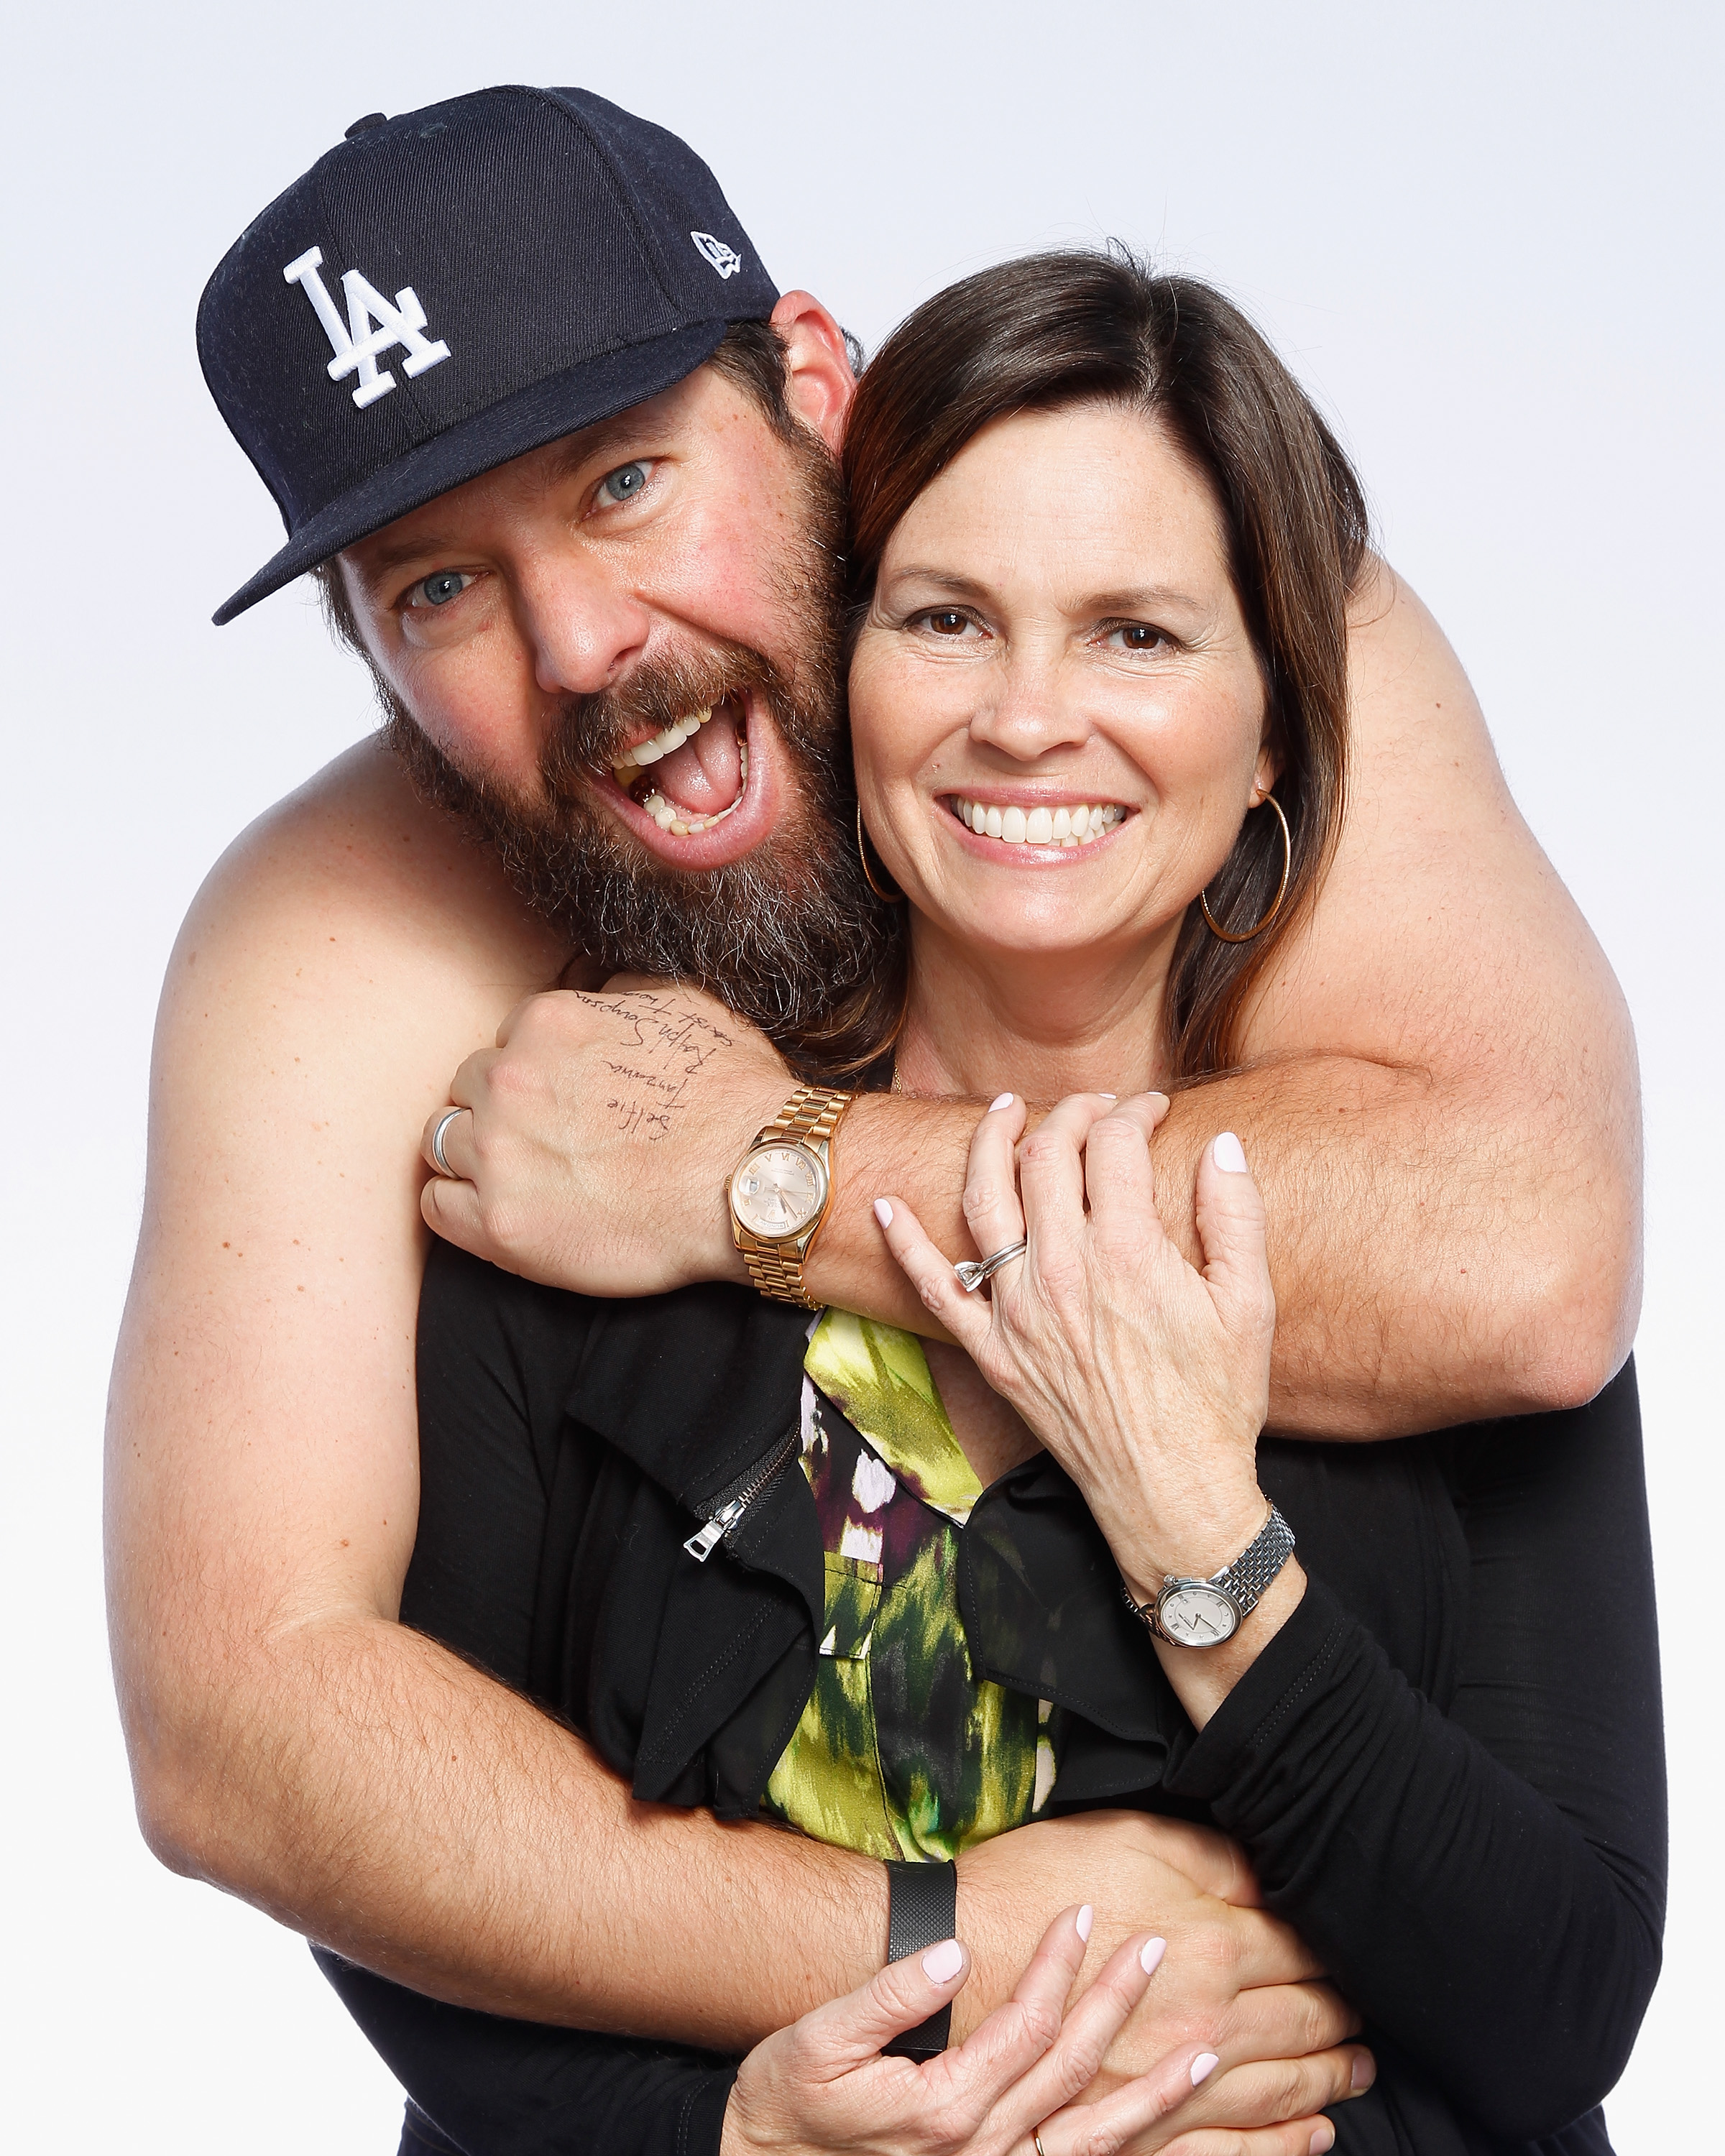 Bert Kreischer (L) poses with his wife Leann Kreischer after his performance at The Ice House Comedy Club, on February 12, 2016, in Pasadena, California. | Source: Getty Images